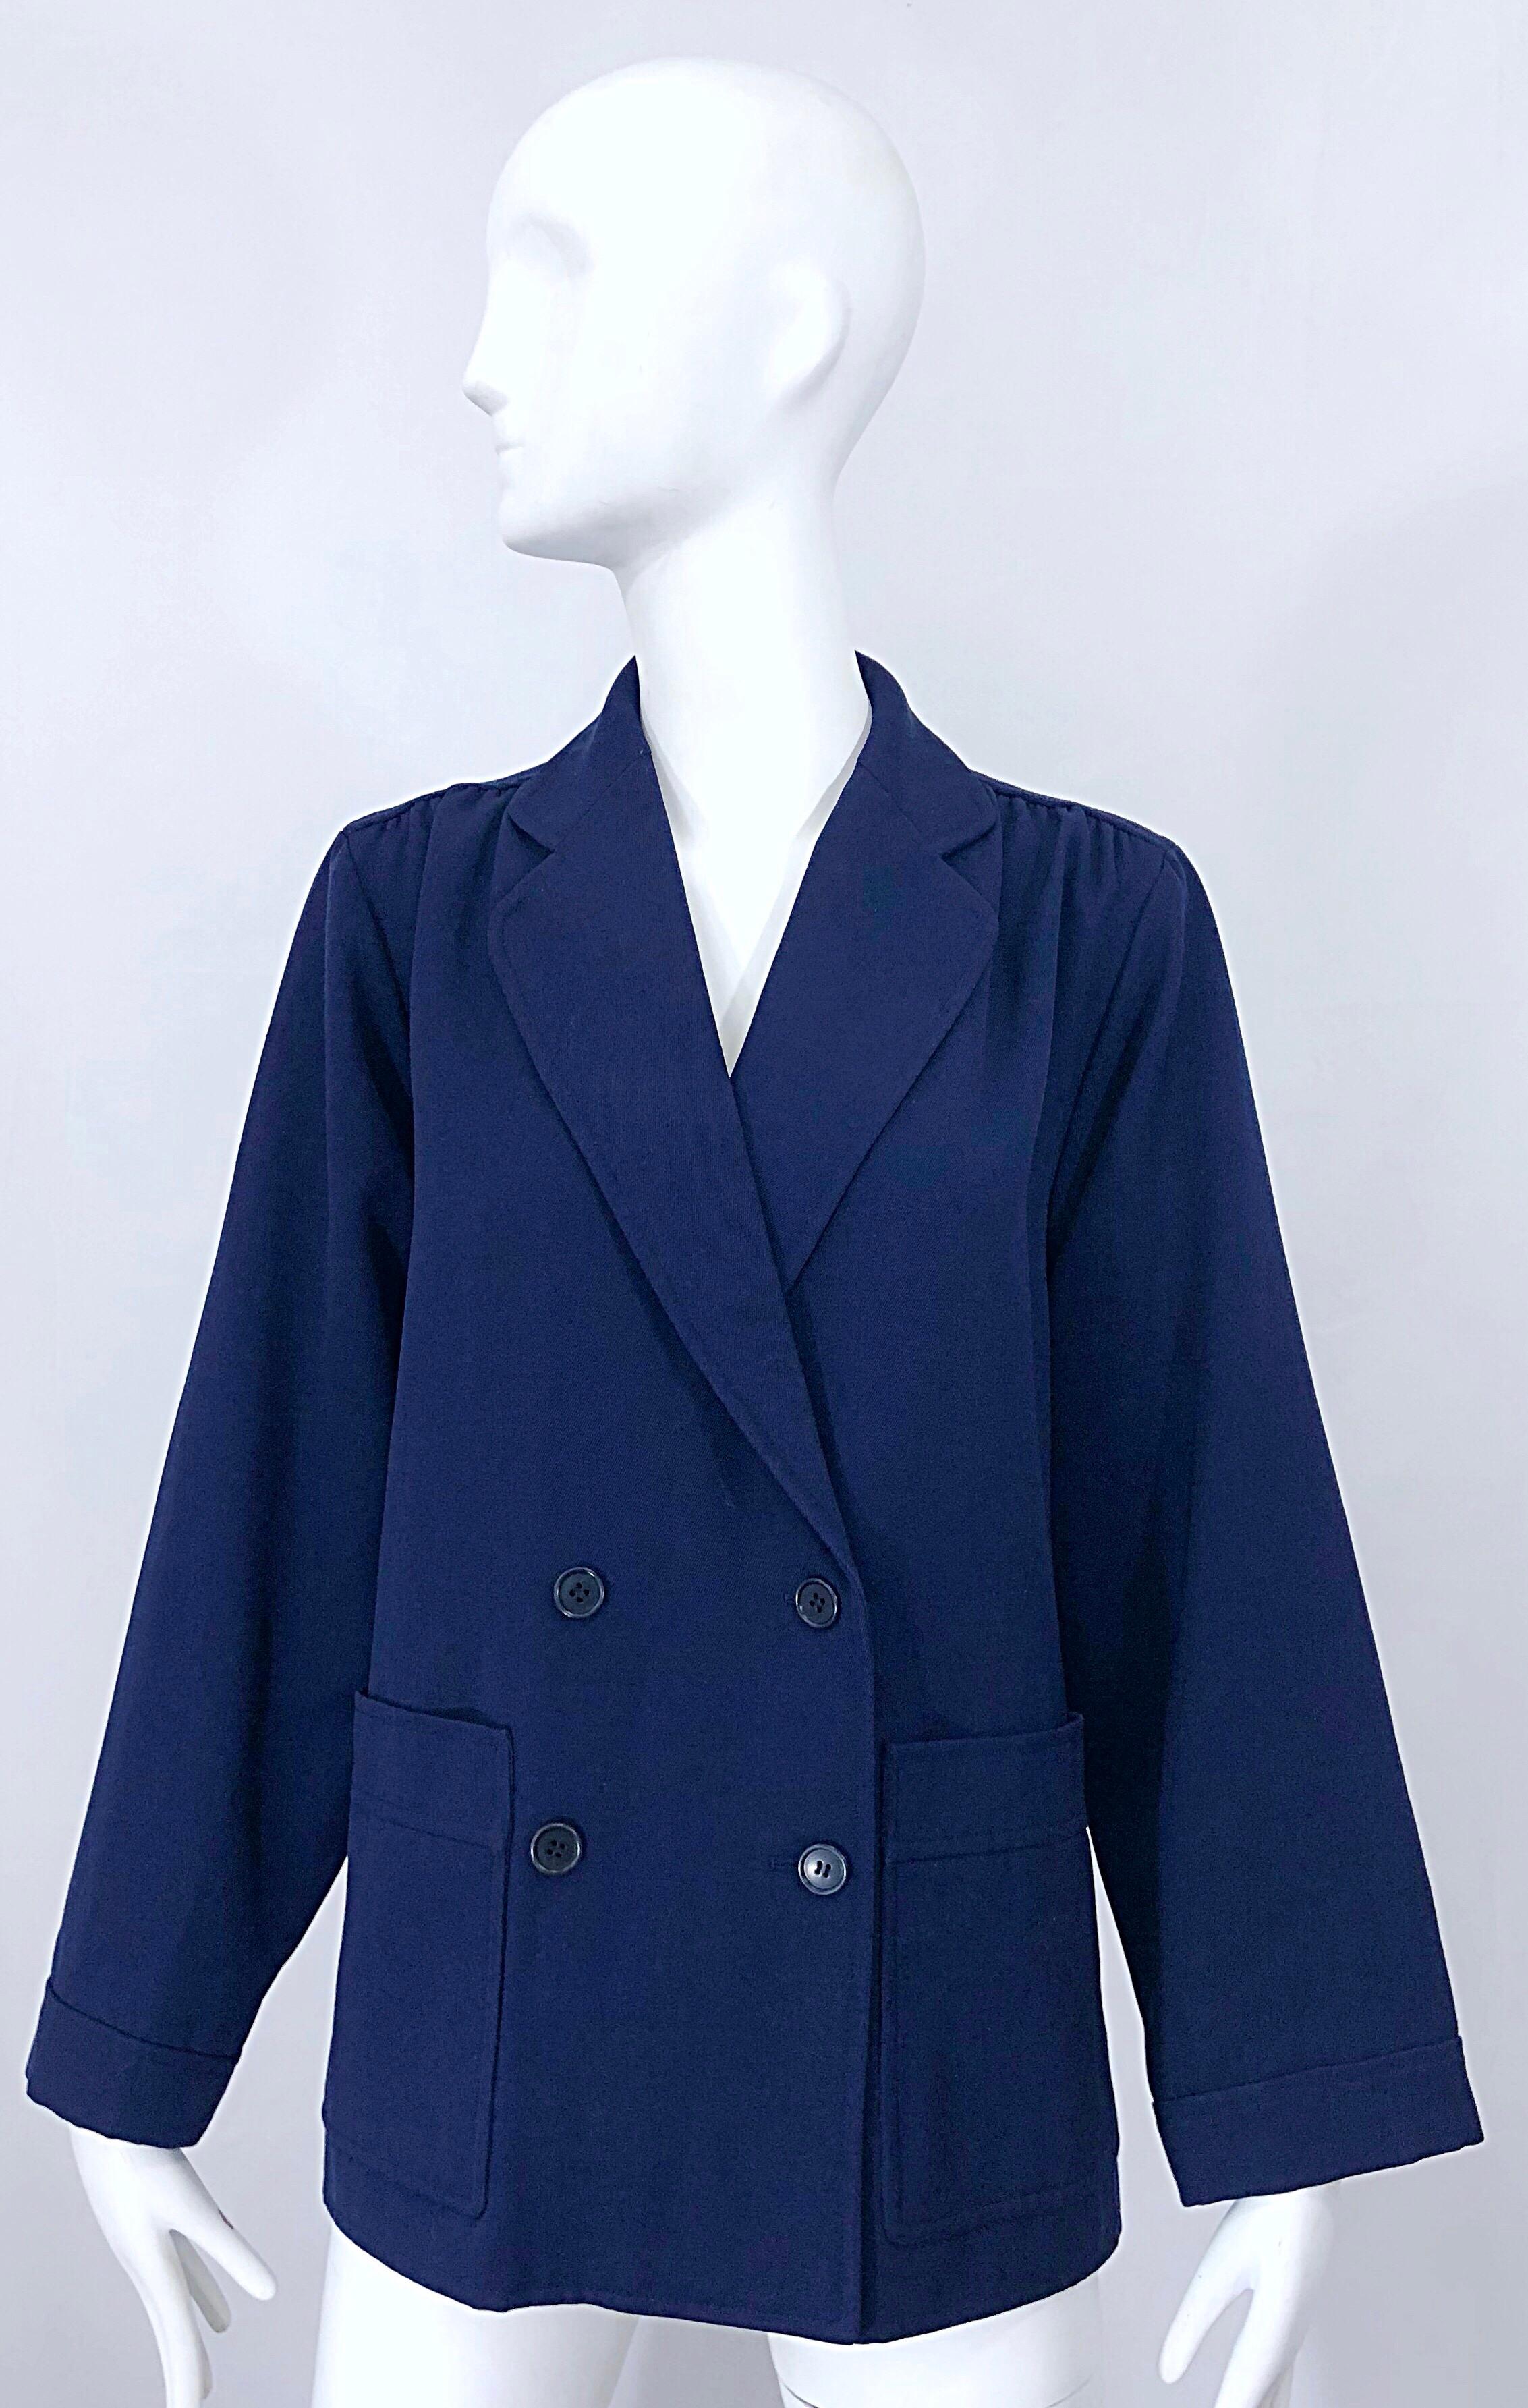 Chic and classic vintage late 60s YVES SAINT LAURENT YSL Rive Gauche lightweight wool swing jacket! The perfect alternative to a black jacket, this gem matches anything, and is perfect all year. Puckered seams at the shoulder. Double breasted style